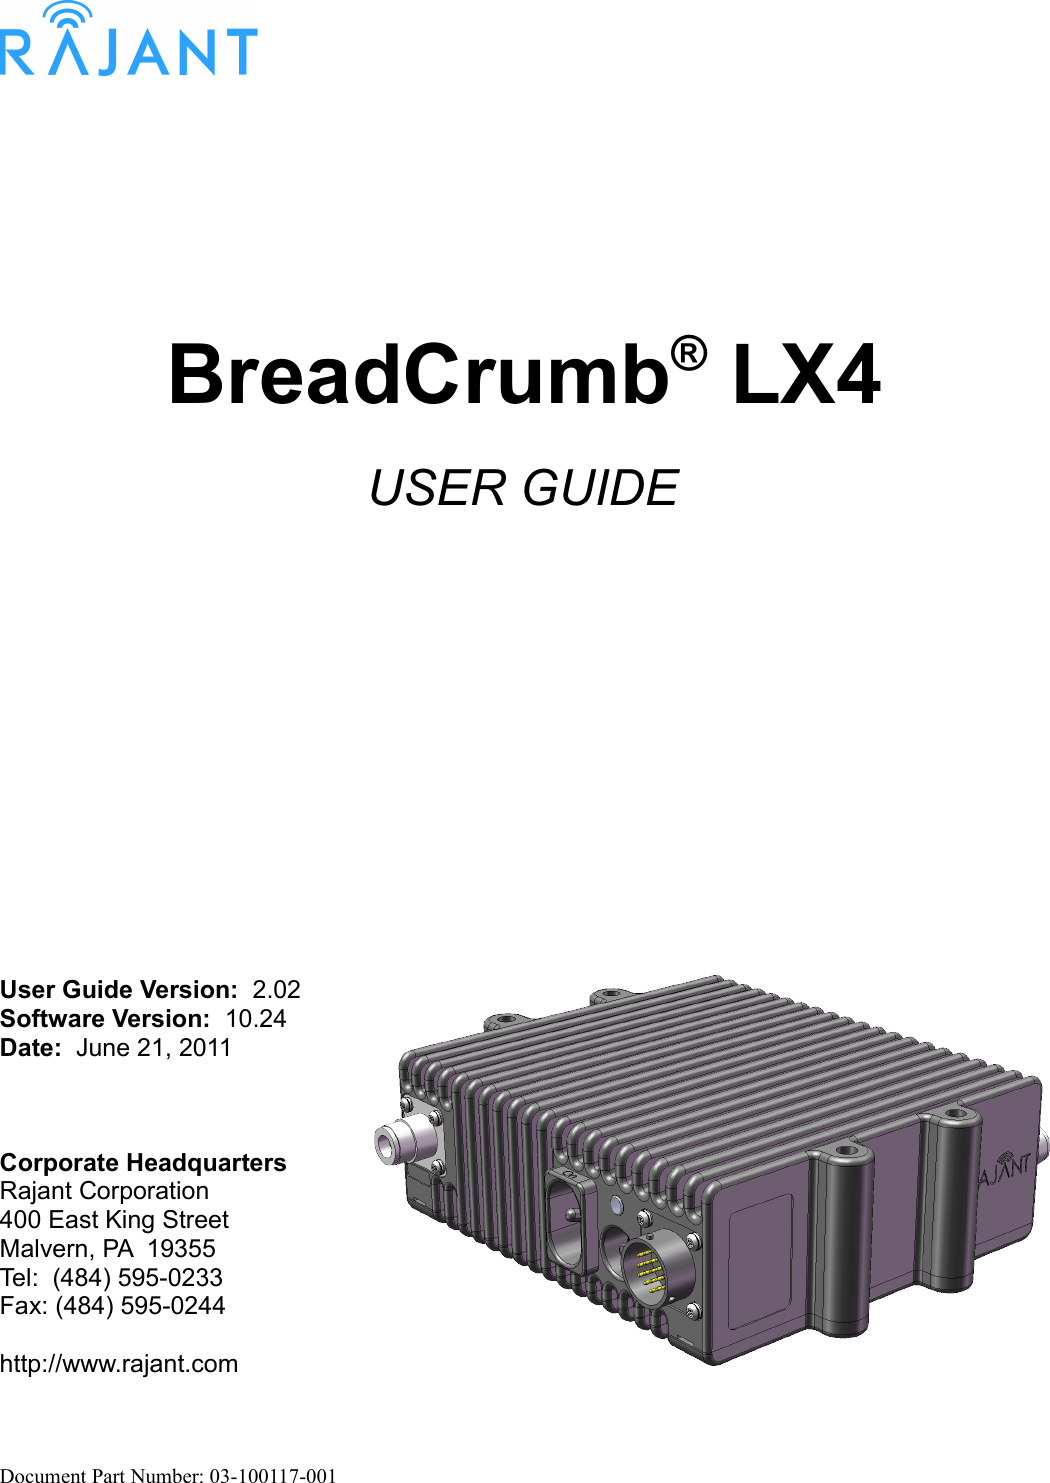 BreadCrumb® LX4USER GUIDEUser Guide Version:  2.02Software Version:  10.24Date:  June 21, 2011Corporate HeadquartersRajant Corporation400 East King StreetMalvern, PA  19355Tel:  (484) 595-0233Fax: (484) 595-0244http://www.rajant.comDocument Part Number: 03-100117-001